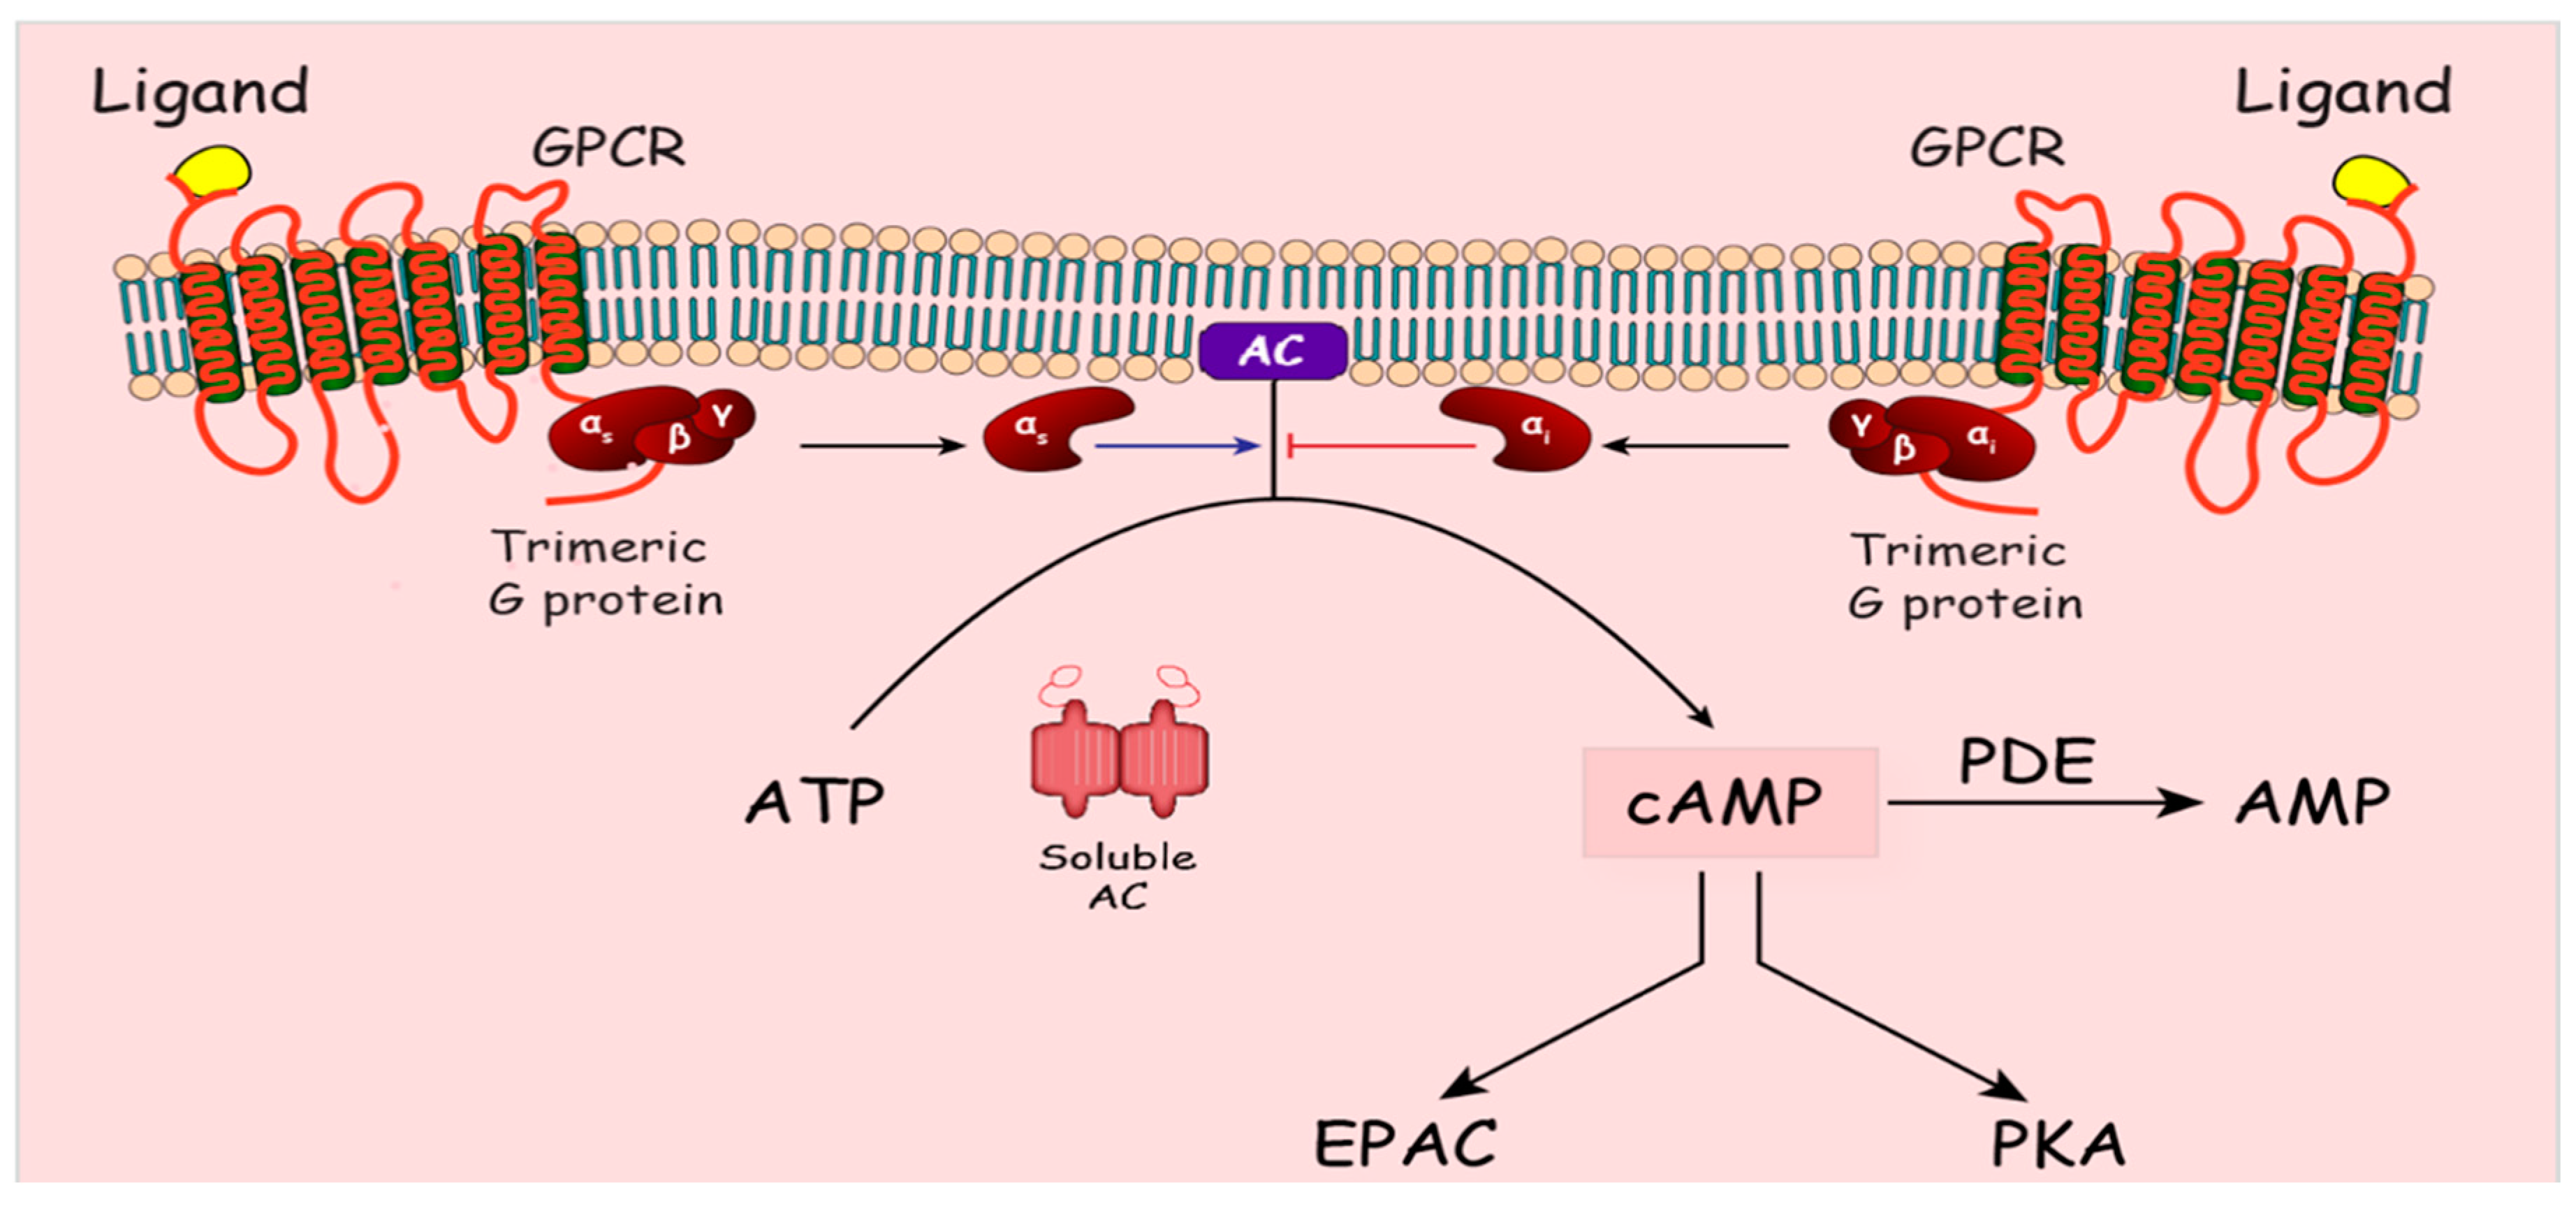 an enzyme which converts atp to cyclic amp